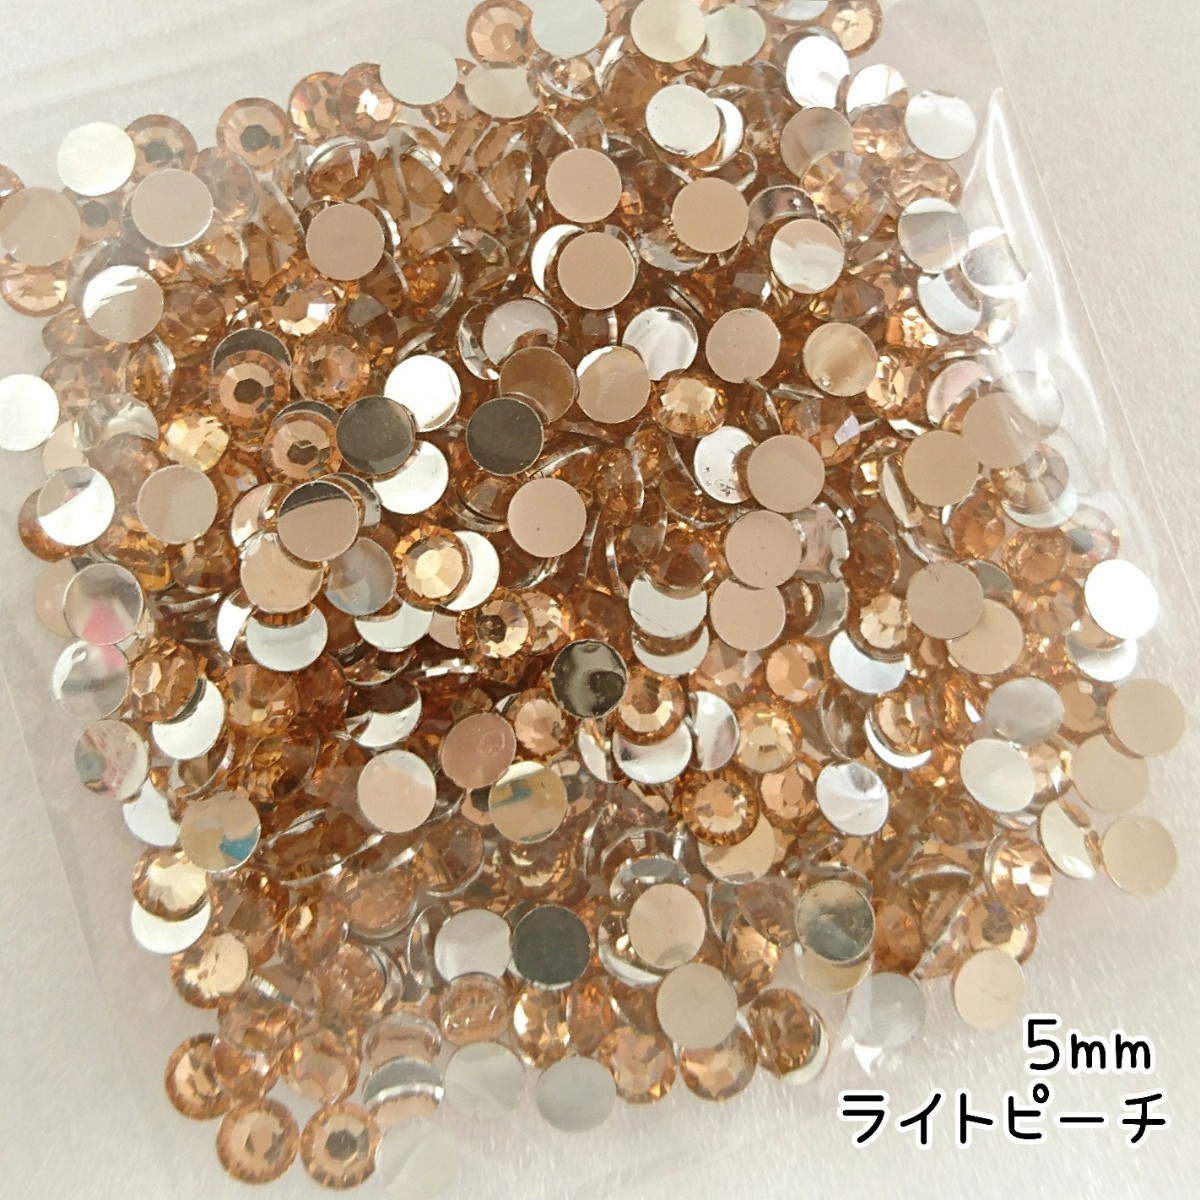  macromolecule Stone 5mm( light pi-chi) approximately 700 bead | deco parts nails * anonymity delivery 